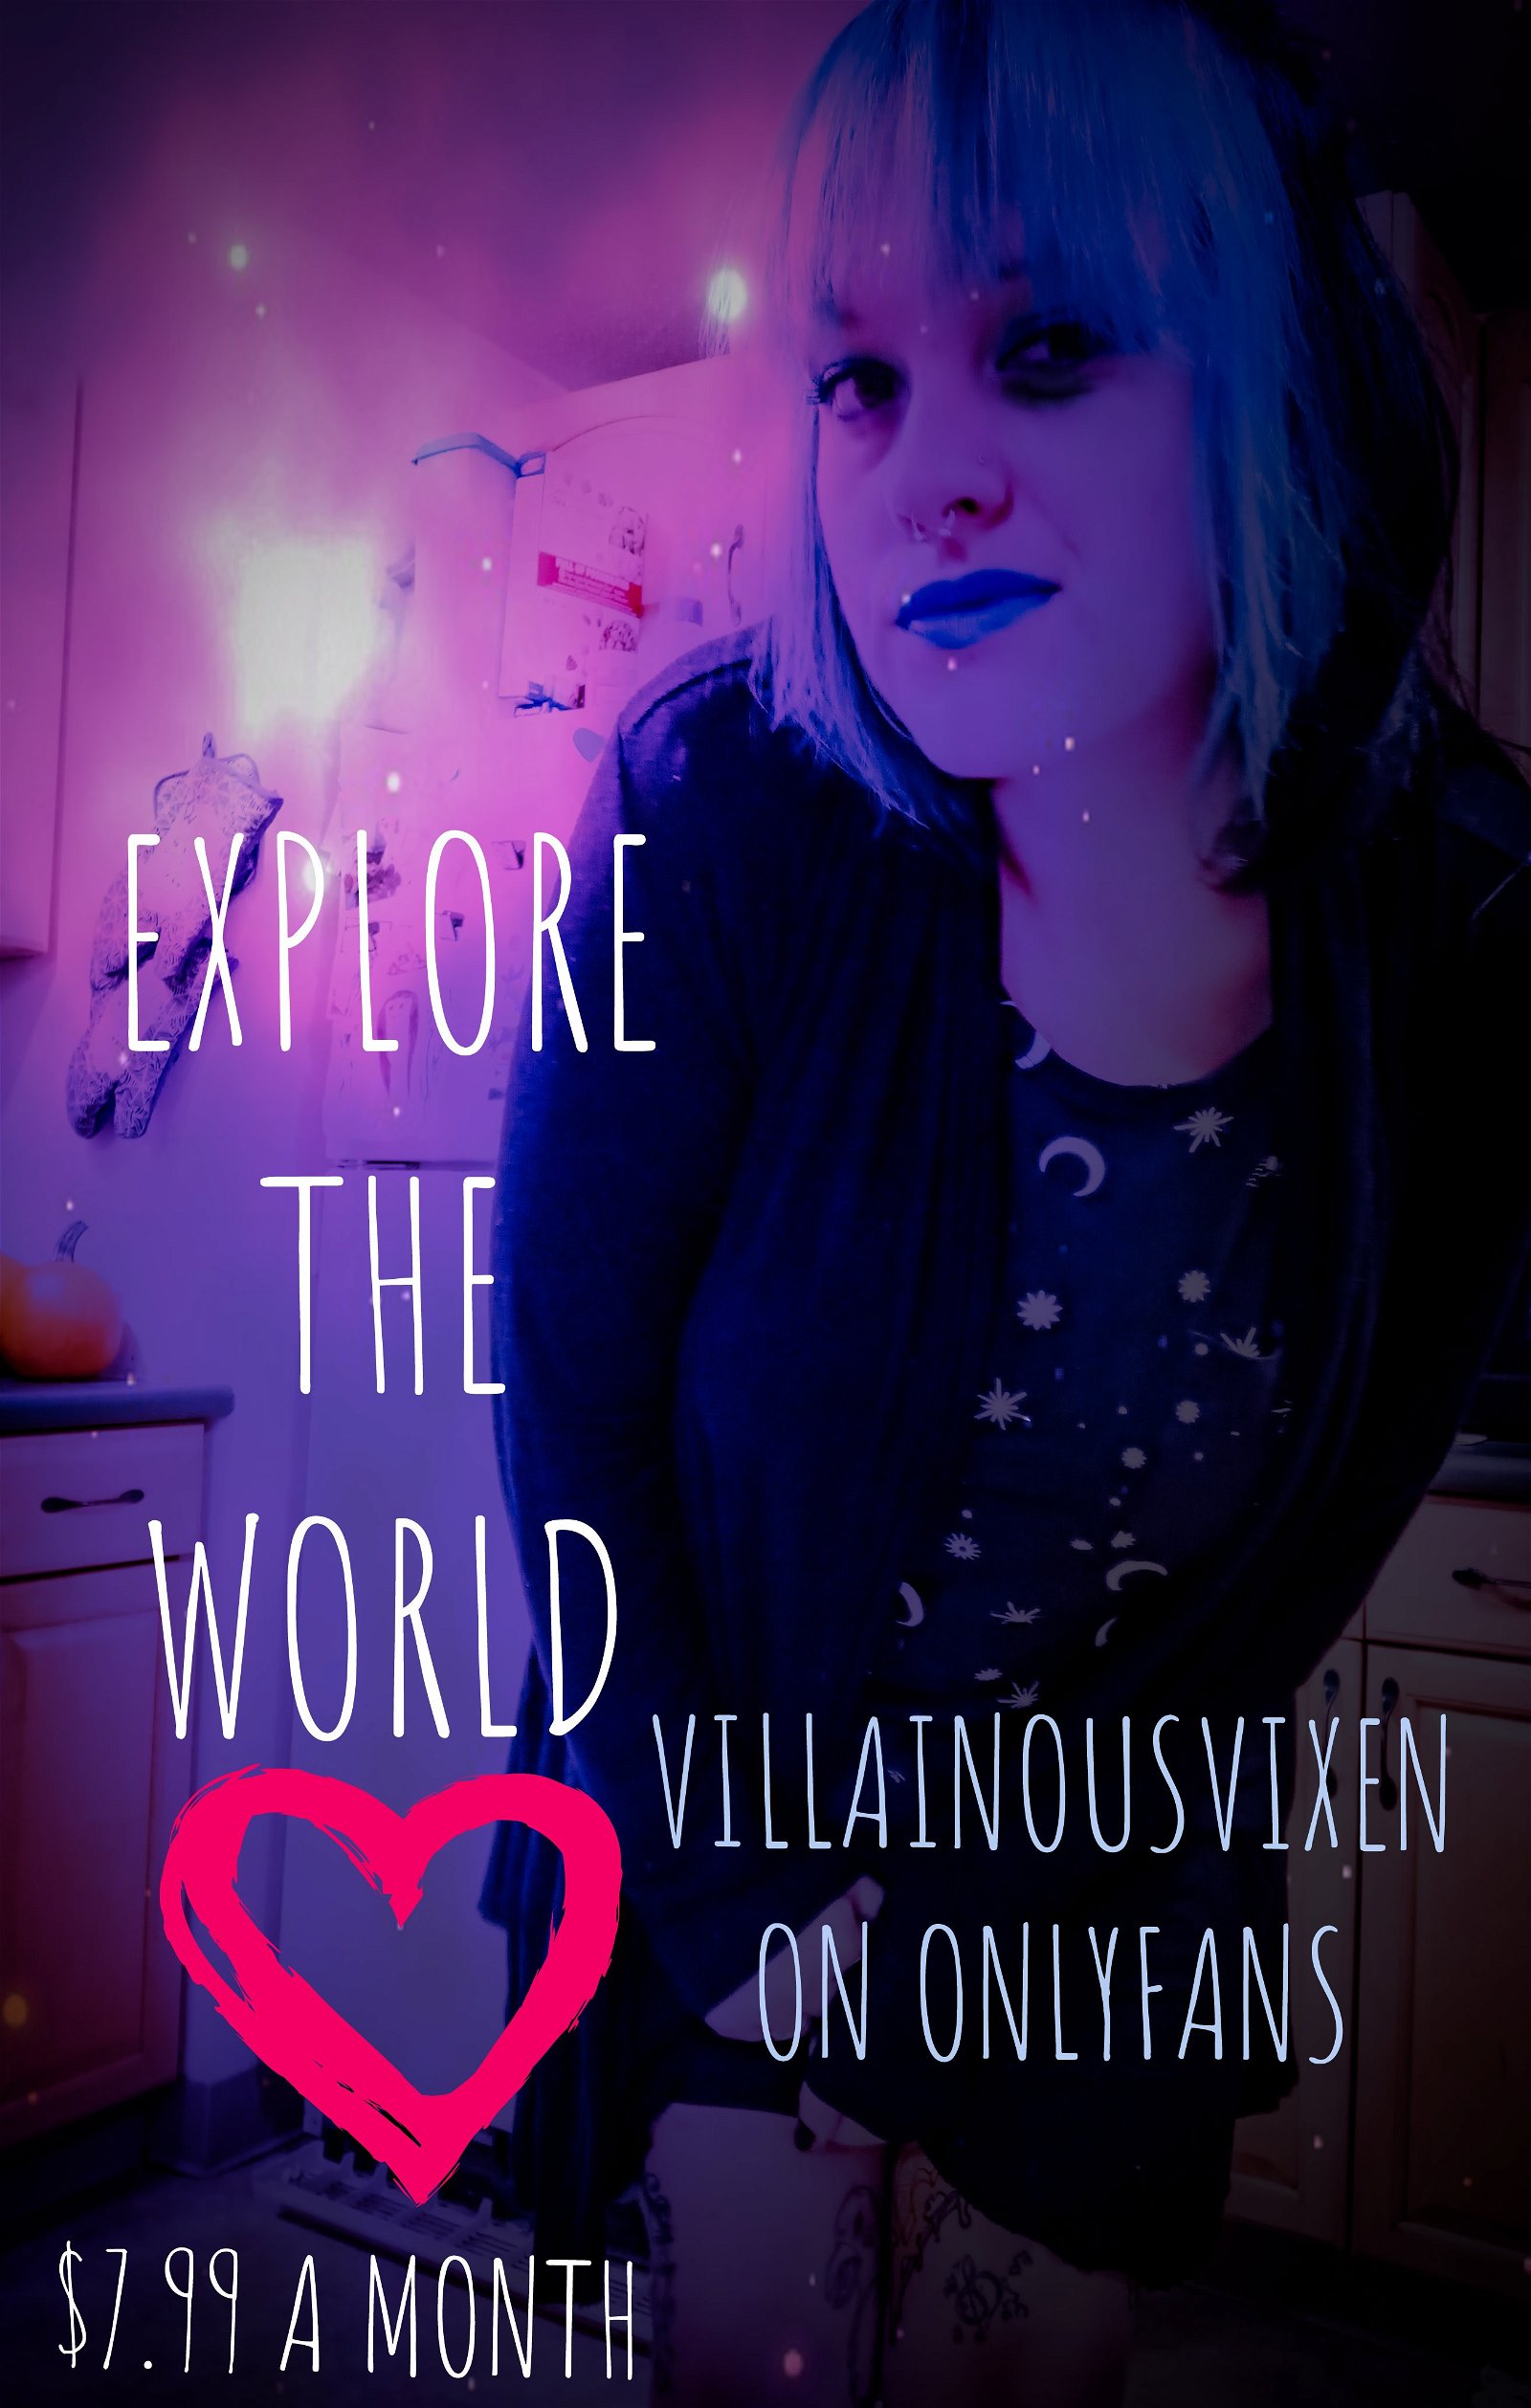 Photo by villainous vixen with the username @villainousvixen, who is a star user, posted on October 1, 2020